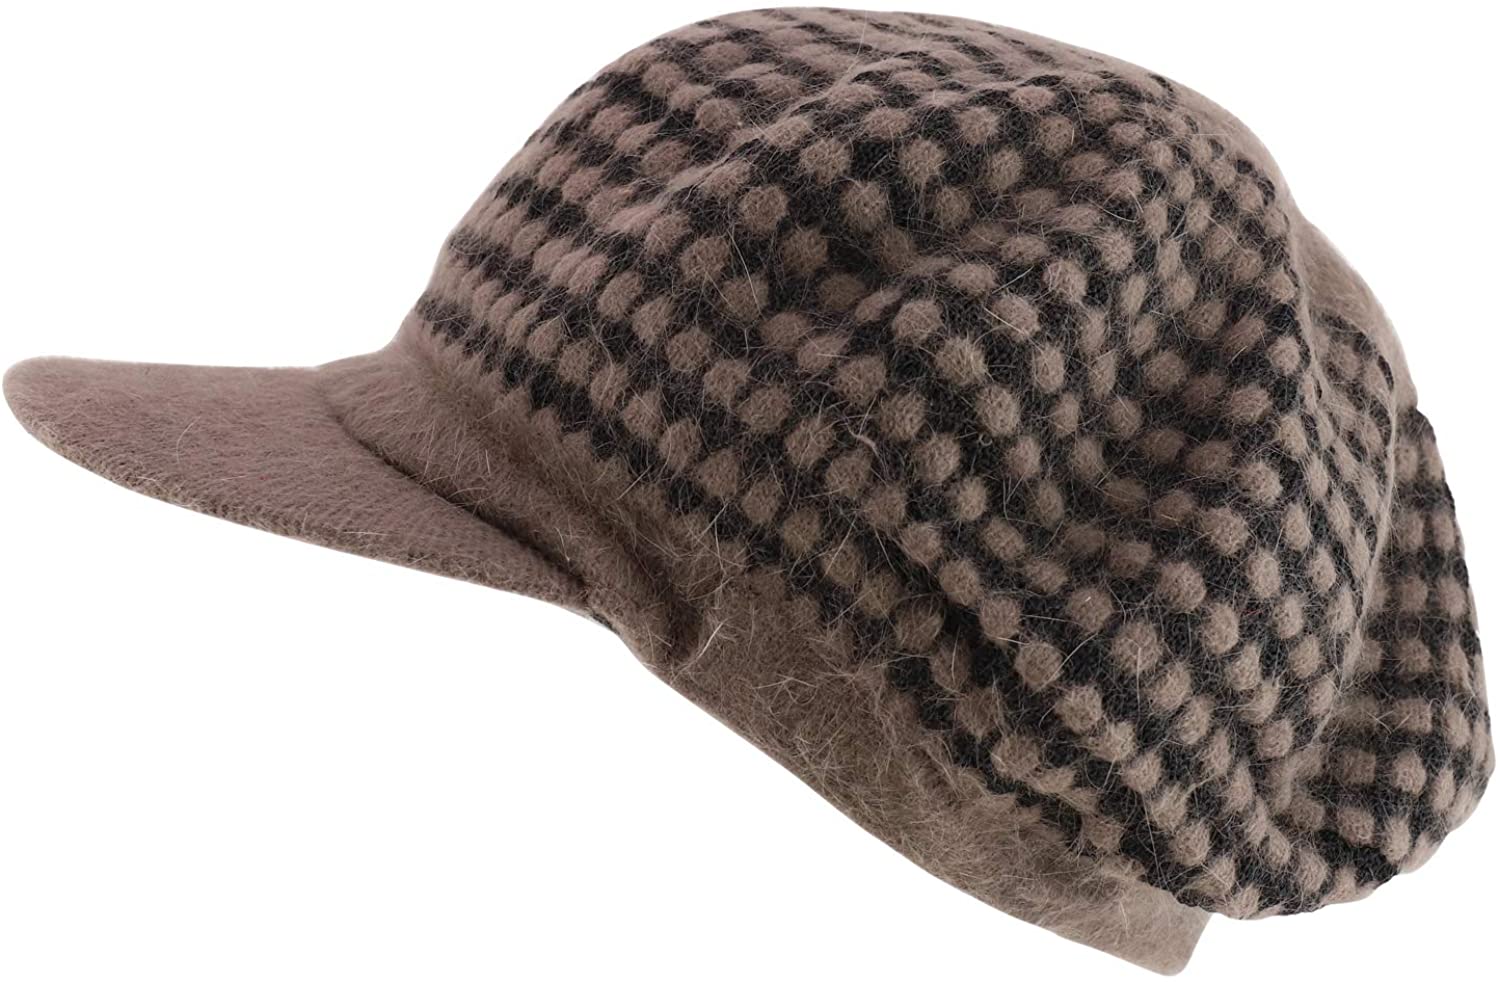 Armycrew Dotted Patterned Angora Fur Mohair Beanie Hat with Visor